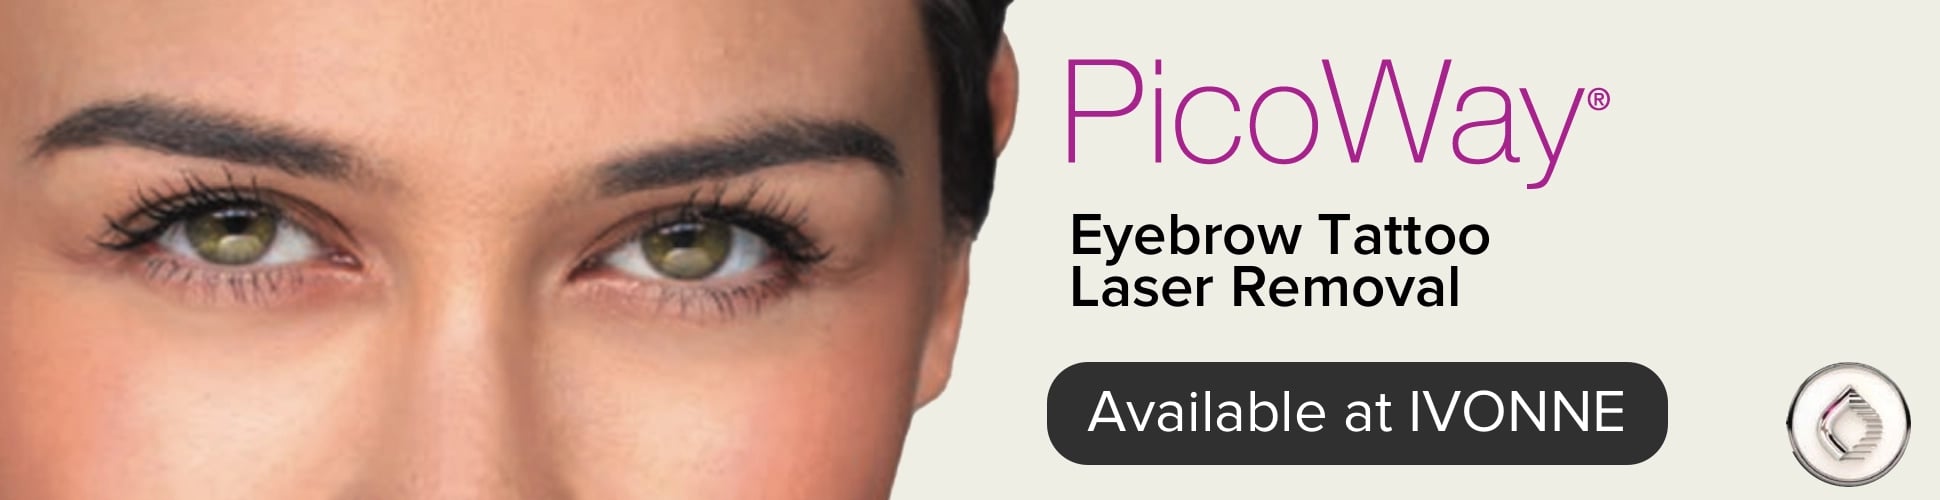 IVONNE_PicoWay_Eyebrow_Removal_Banner